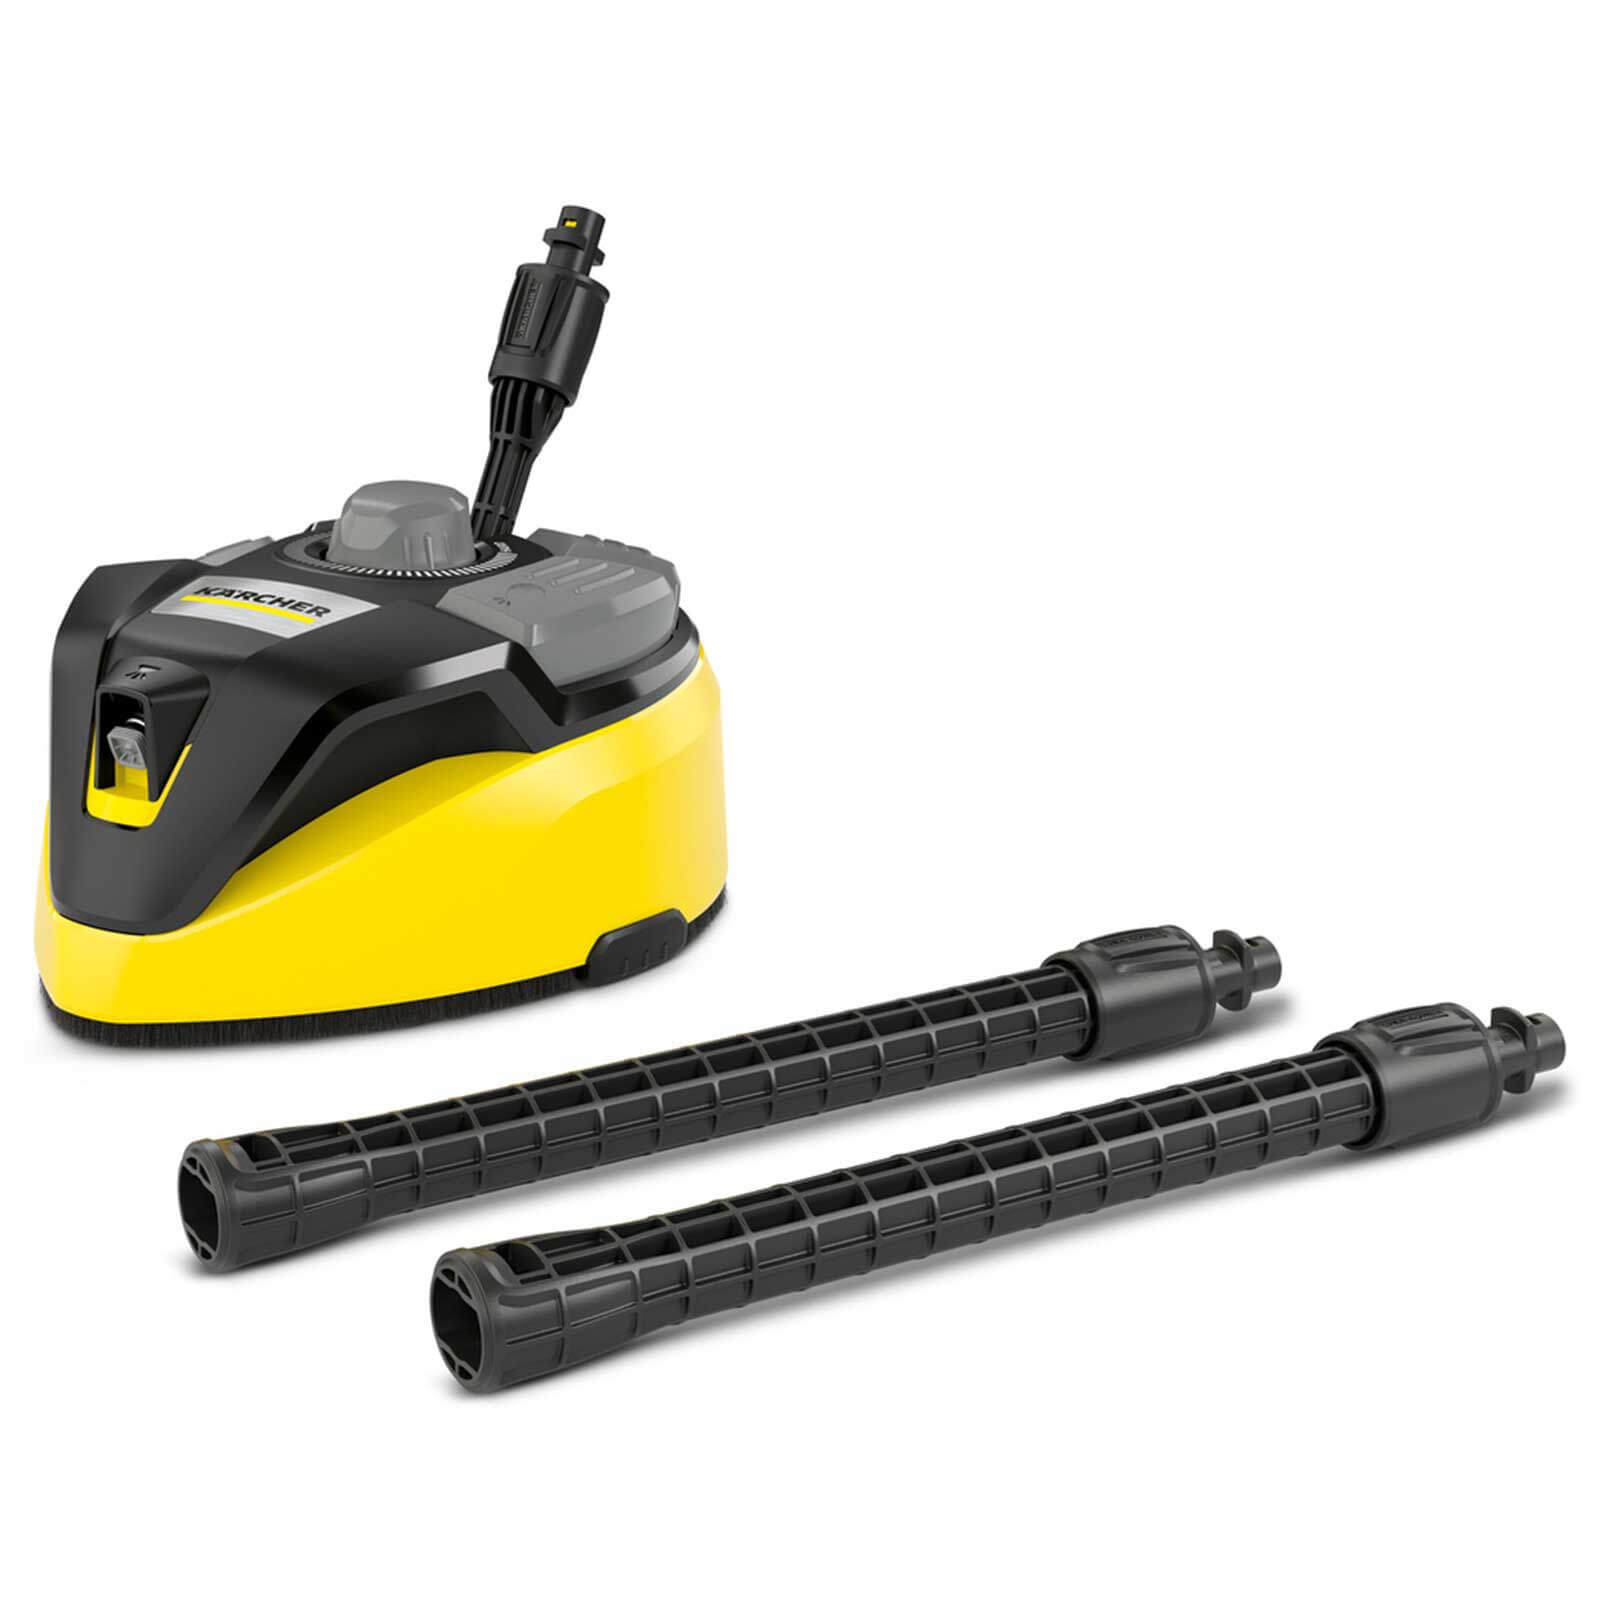 Karcher T 7 Plus T-Racer Surface Cleaner for K4 to K7 Pressure Washers